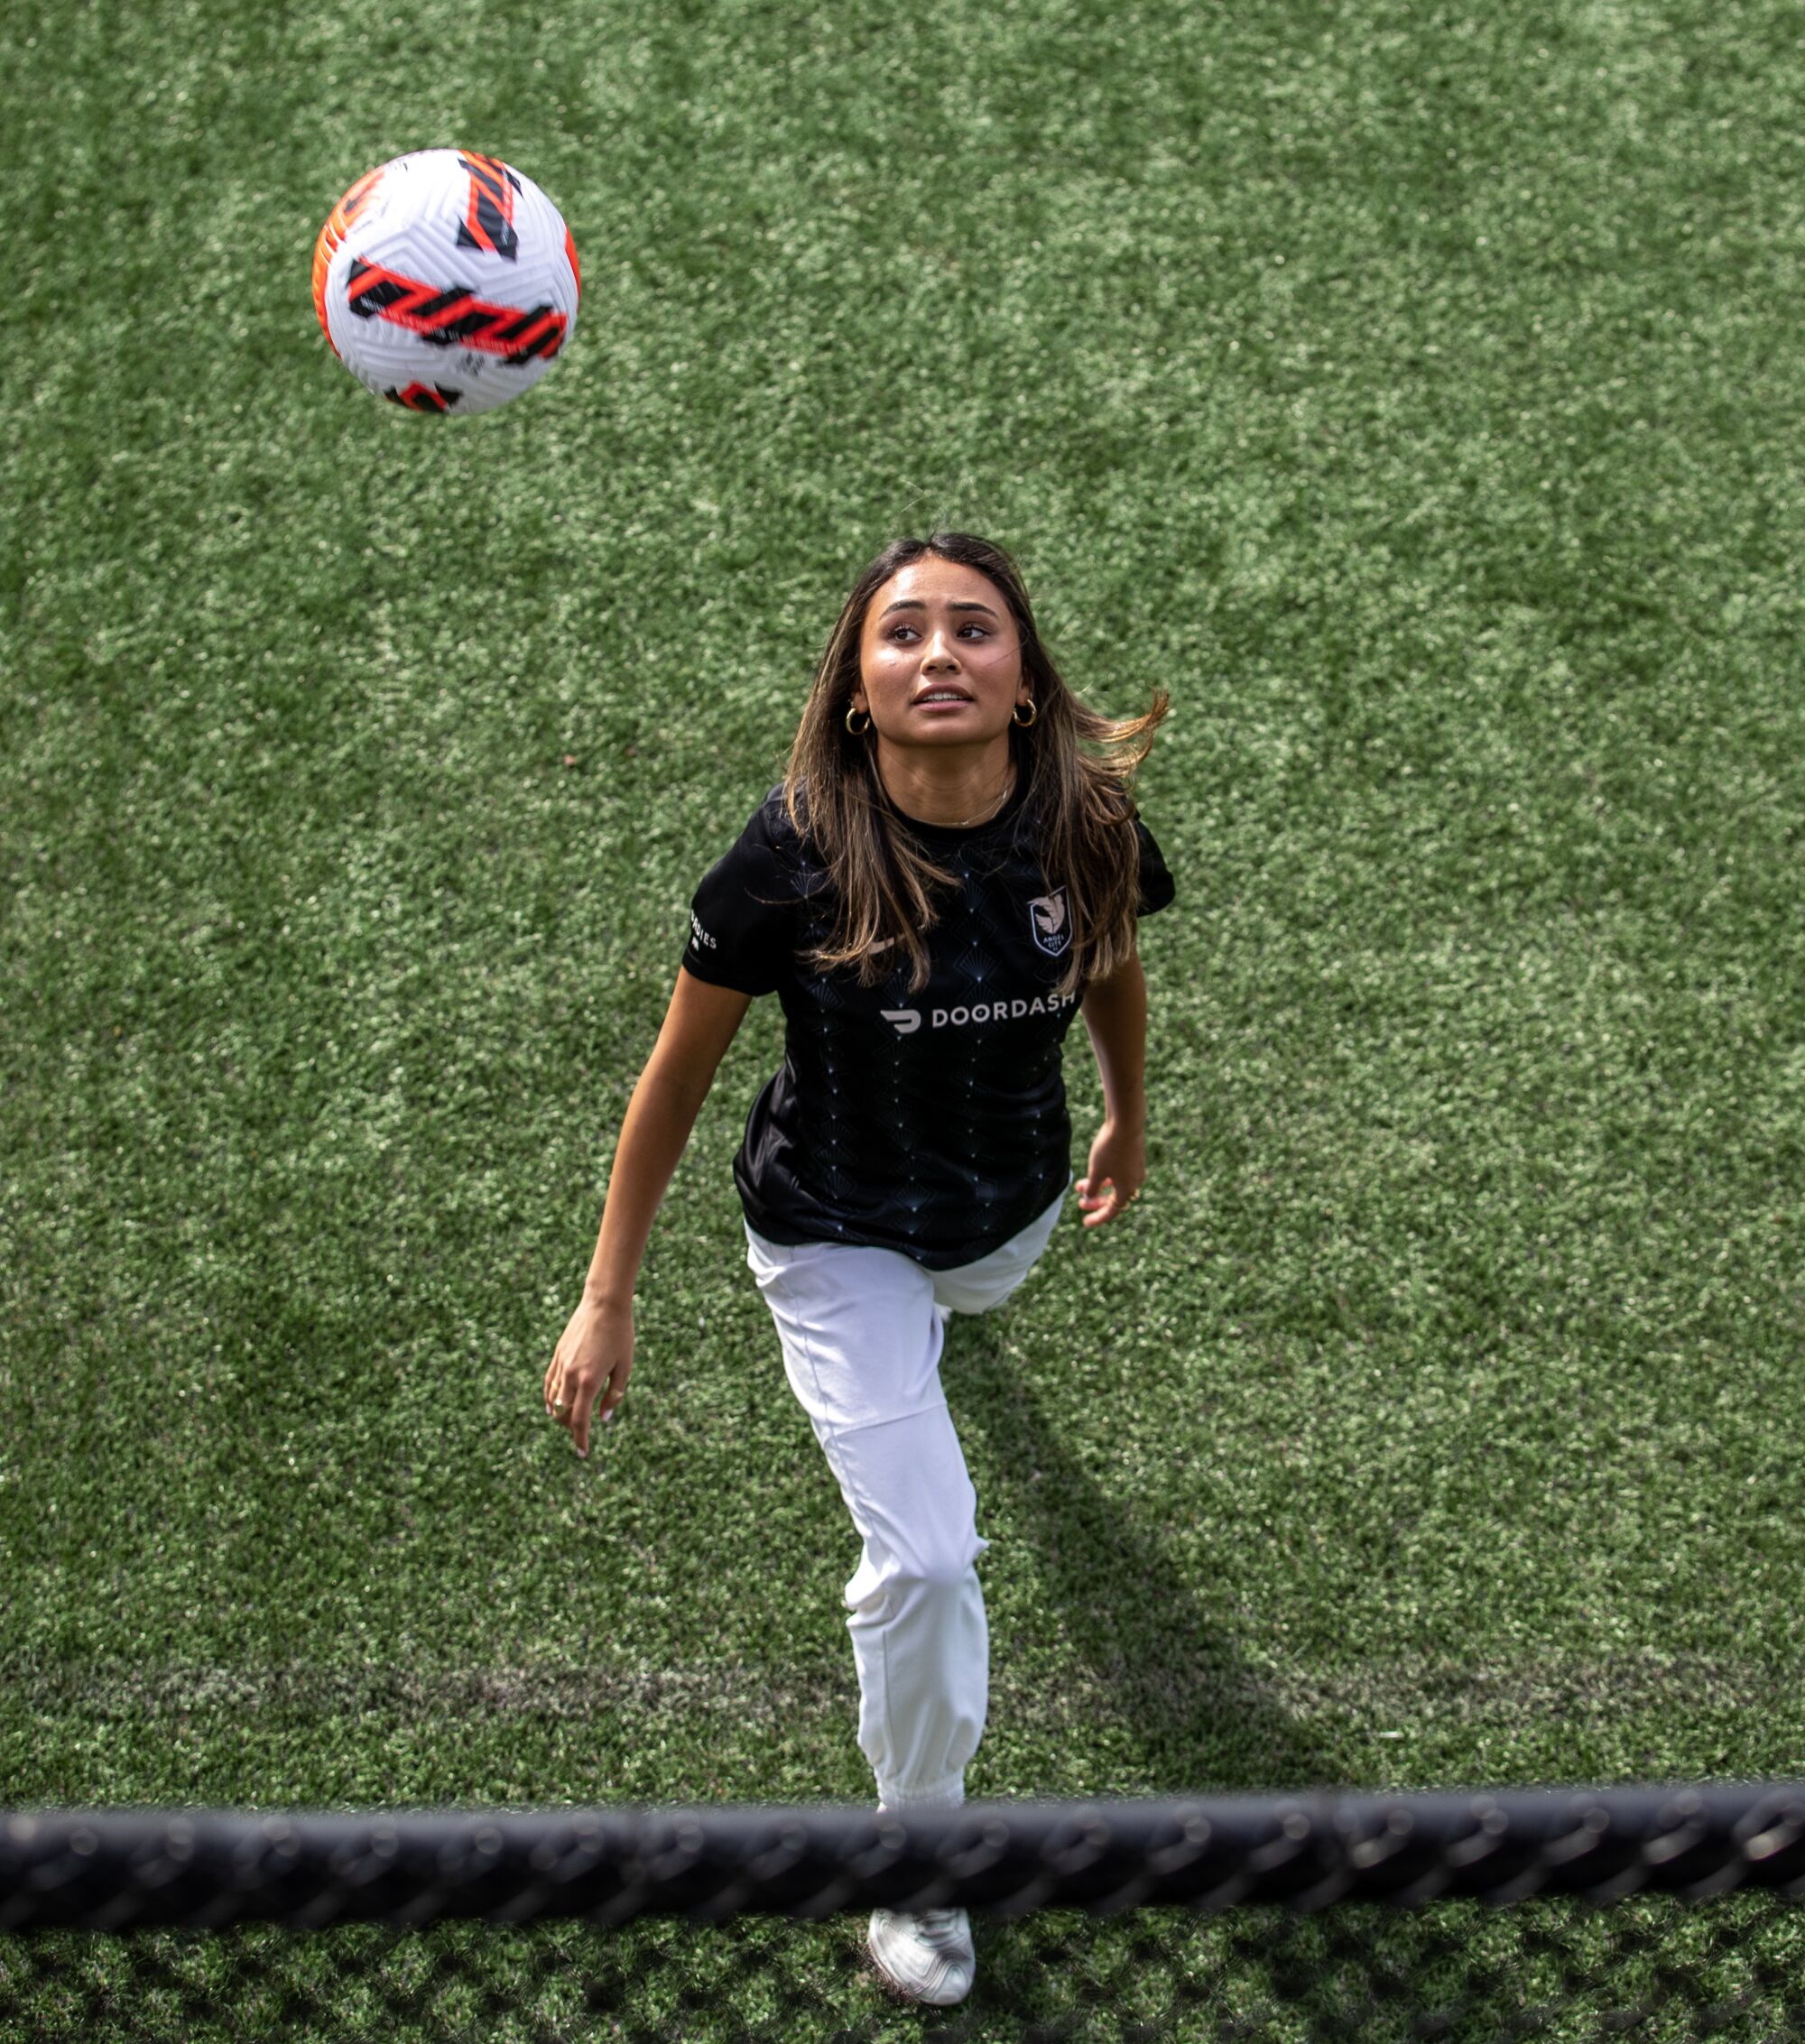 Alyssa Thompson looks up at a soccer ball while standing on a field.